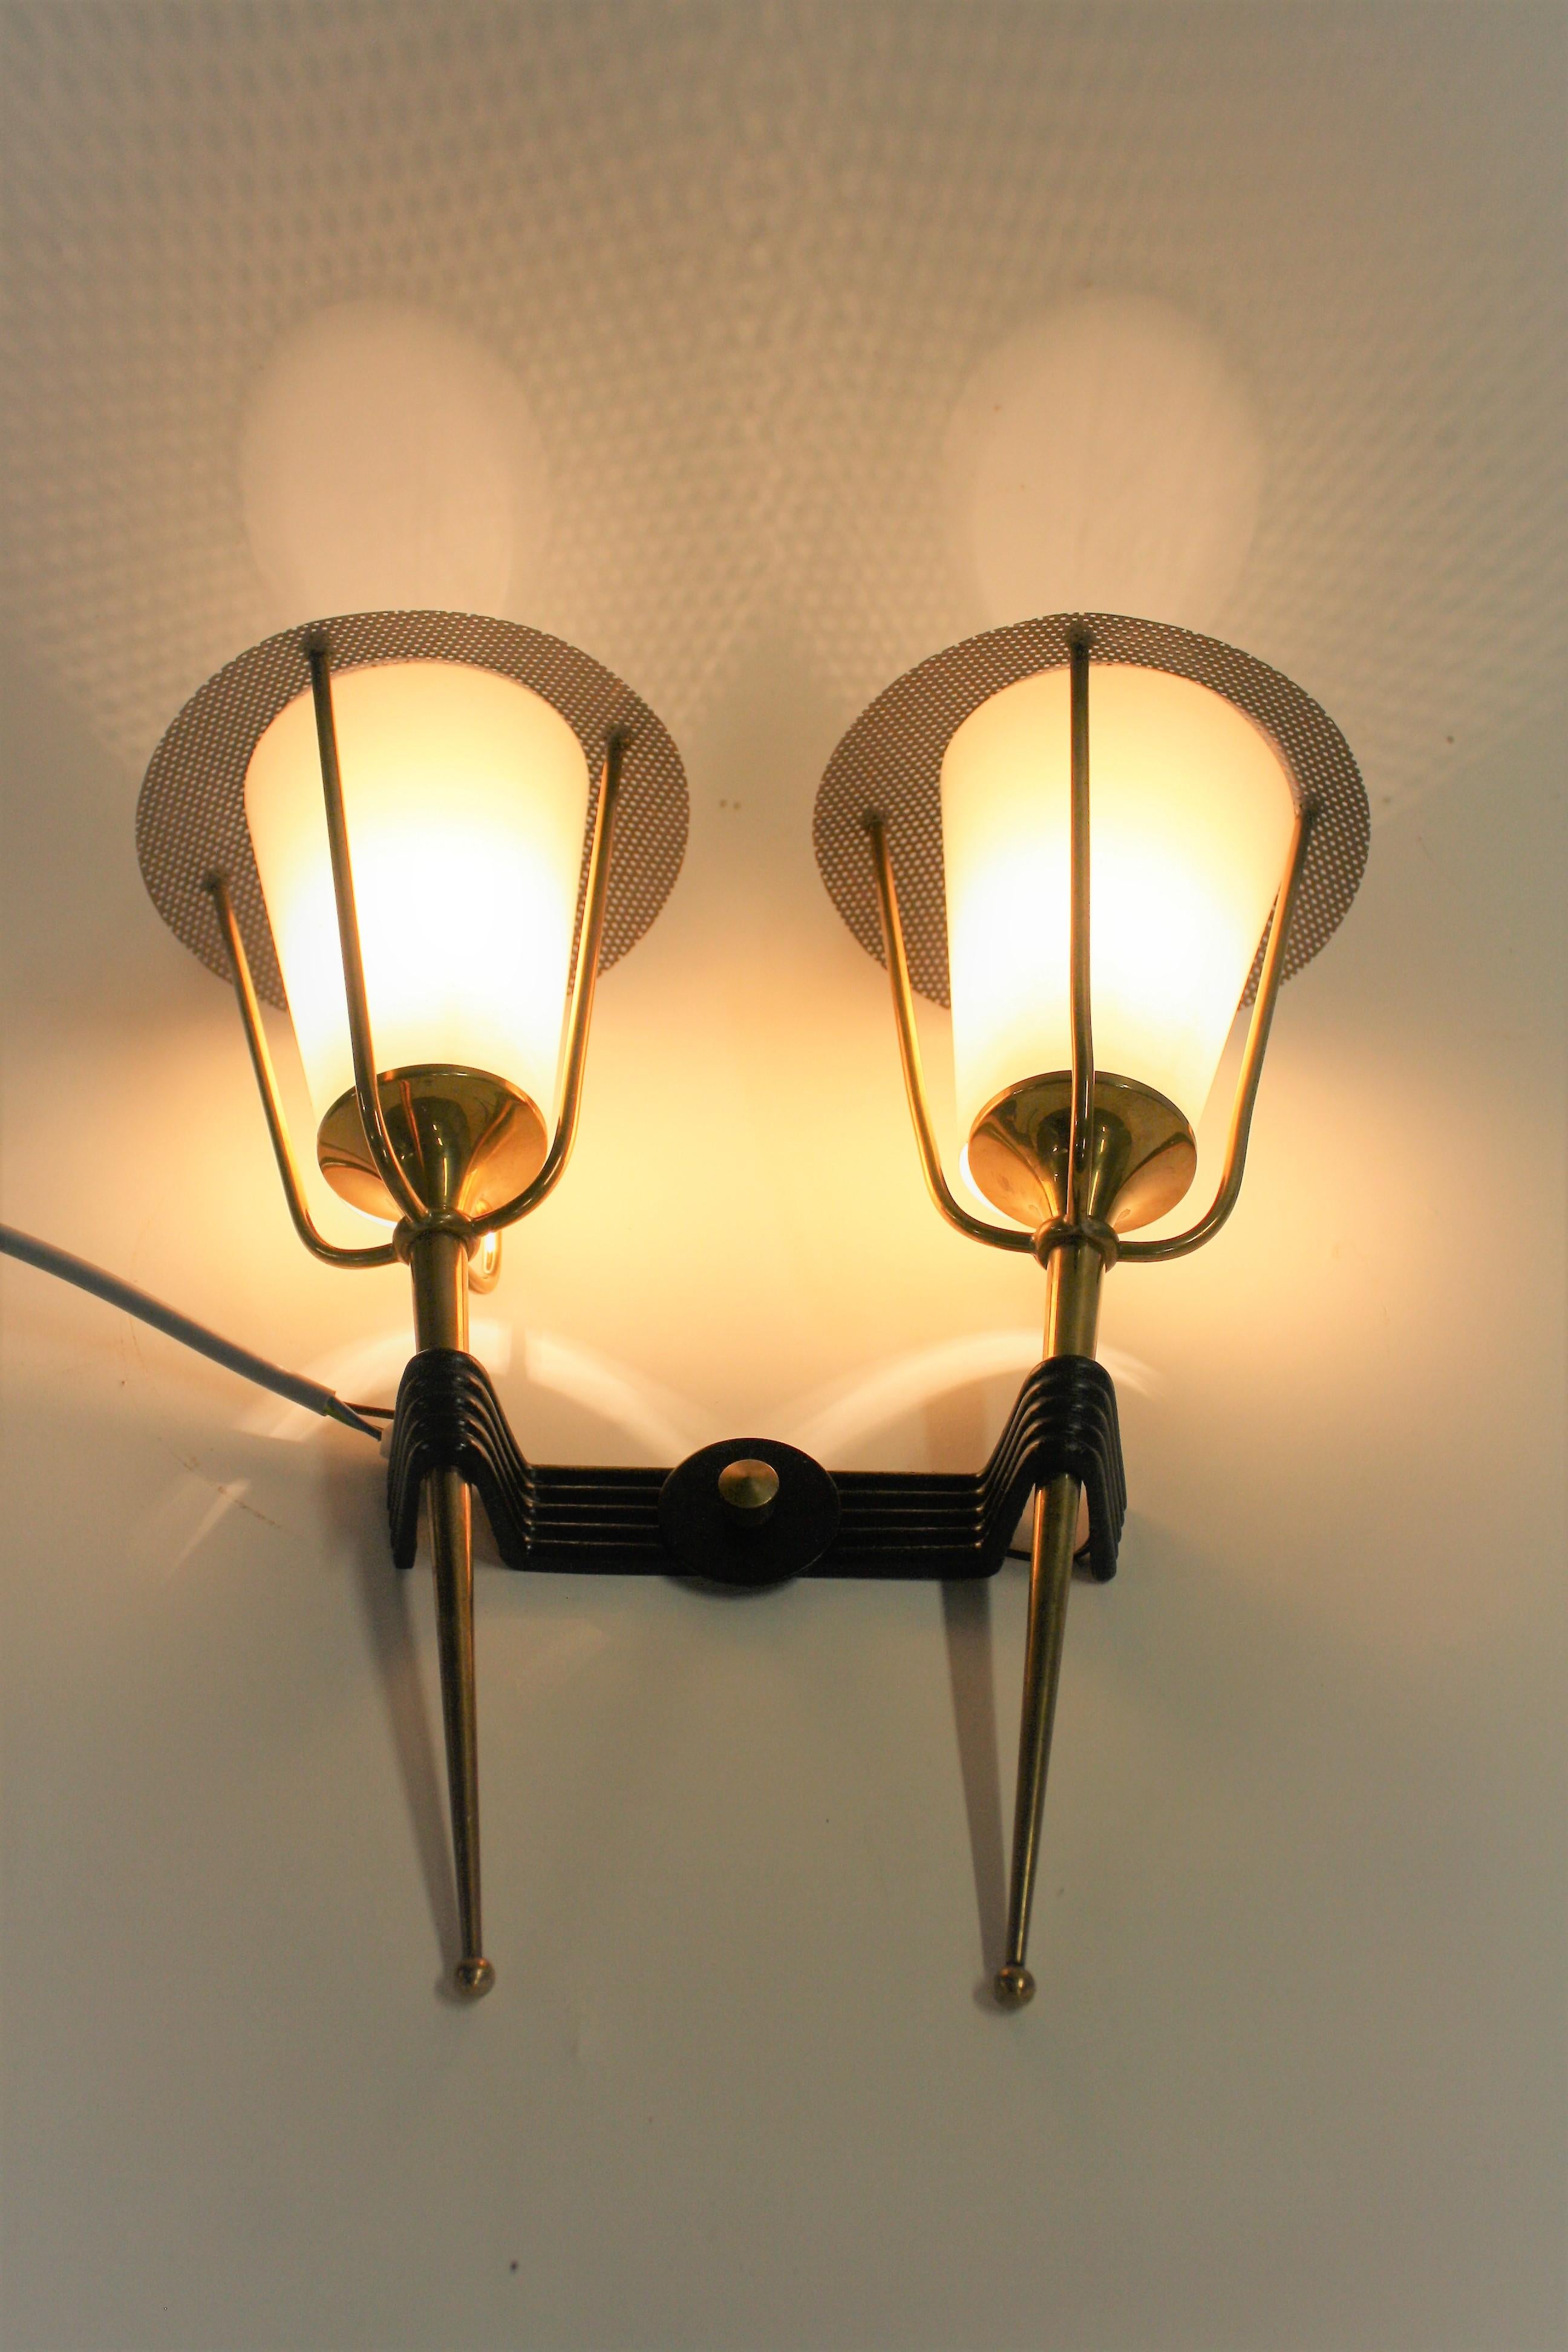 Mid-Century Modern Vintage Wall Sconce by Maison Arlus, 1950s